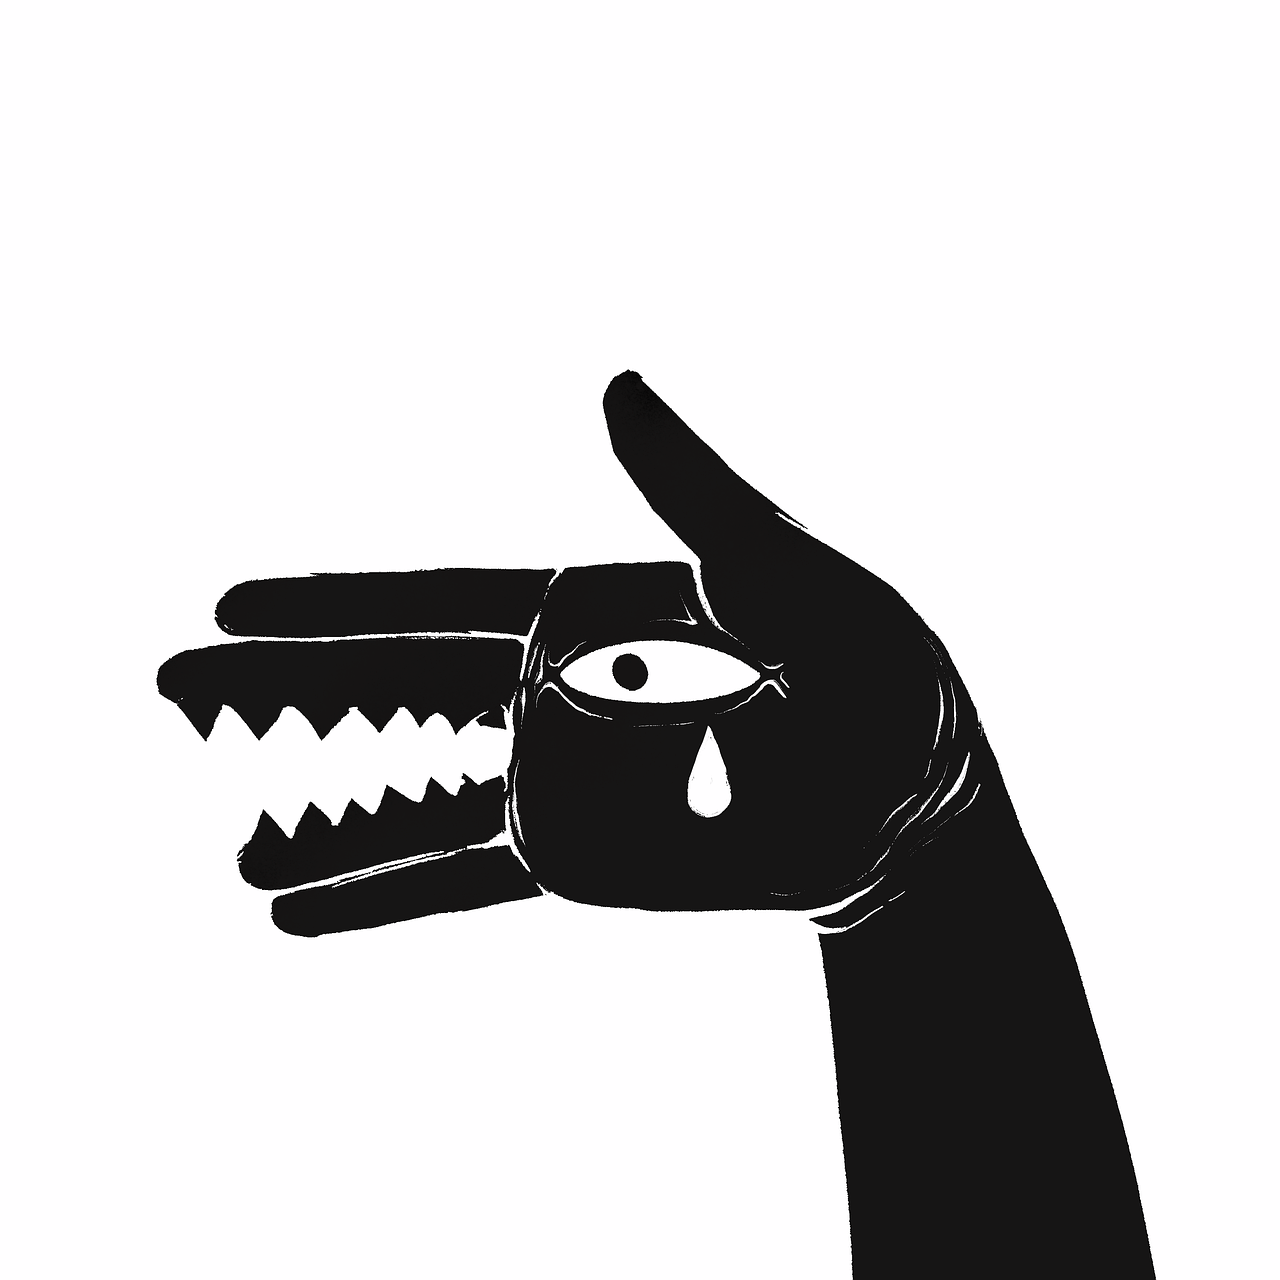 a black and white drawing of a hand holding a dog's mouth, a cartoon, by Alexis Grimou, tumblr, surrealism, tears drip from the eyes, vector illustration, black silhouette, half shark alligator half man